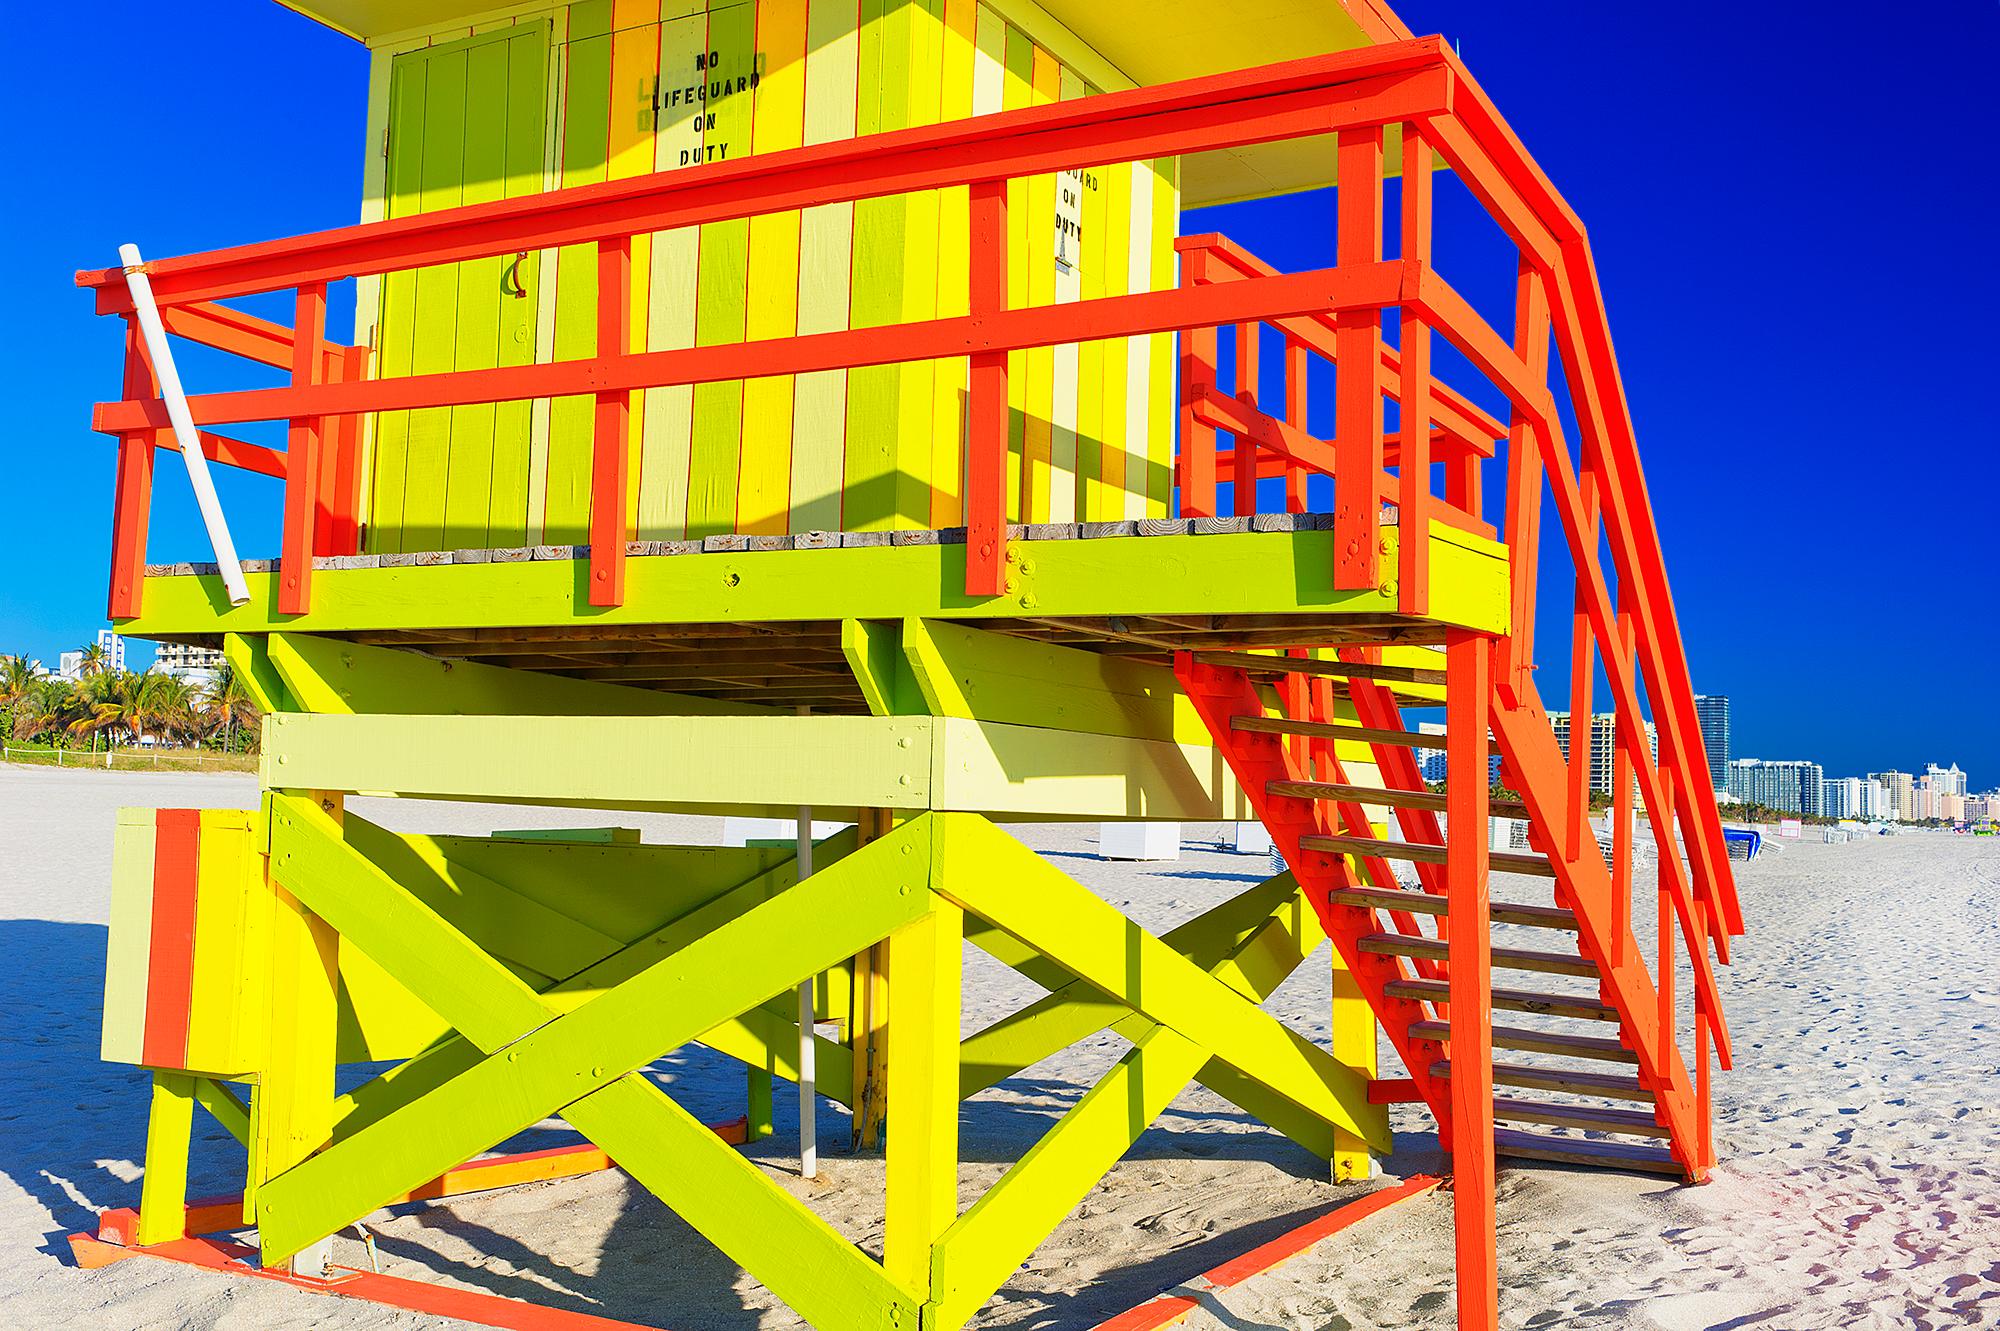 Mitchell Funk Abstract Photograph - South Beach Life Guard Station in Red, Yellow and Blue